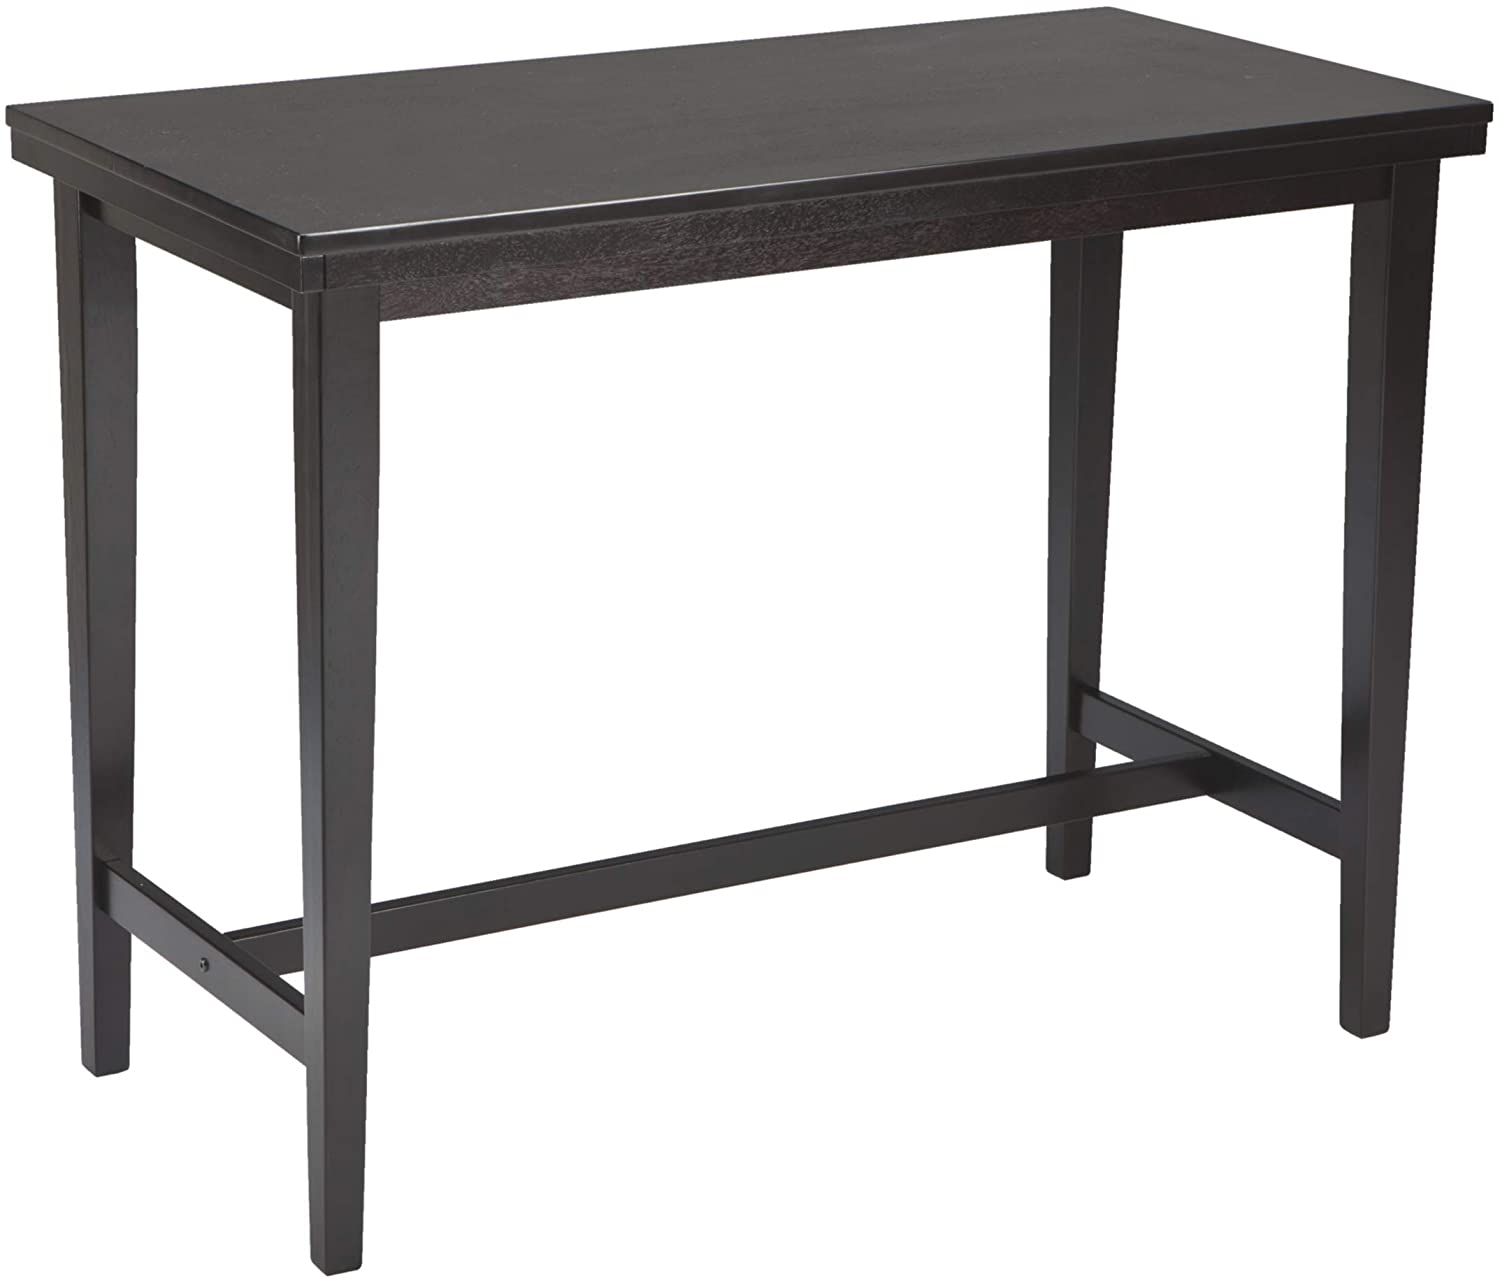 B01EYJXX9W Signature Design by Ashley Kimonte Counter Height Dining Room Table, Dark Brown